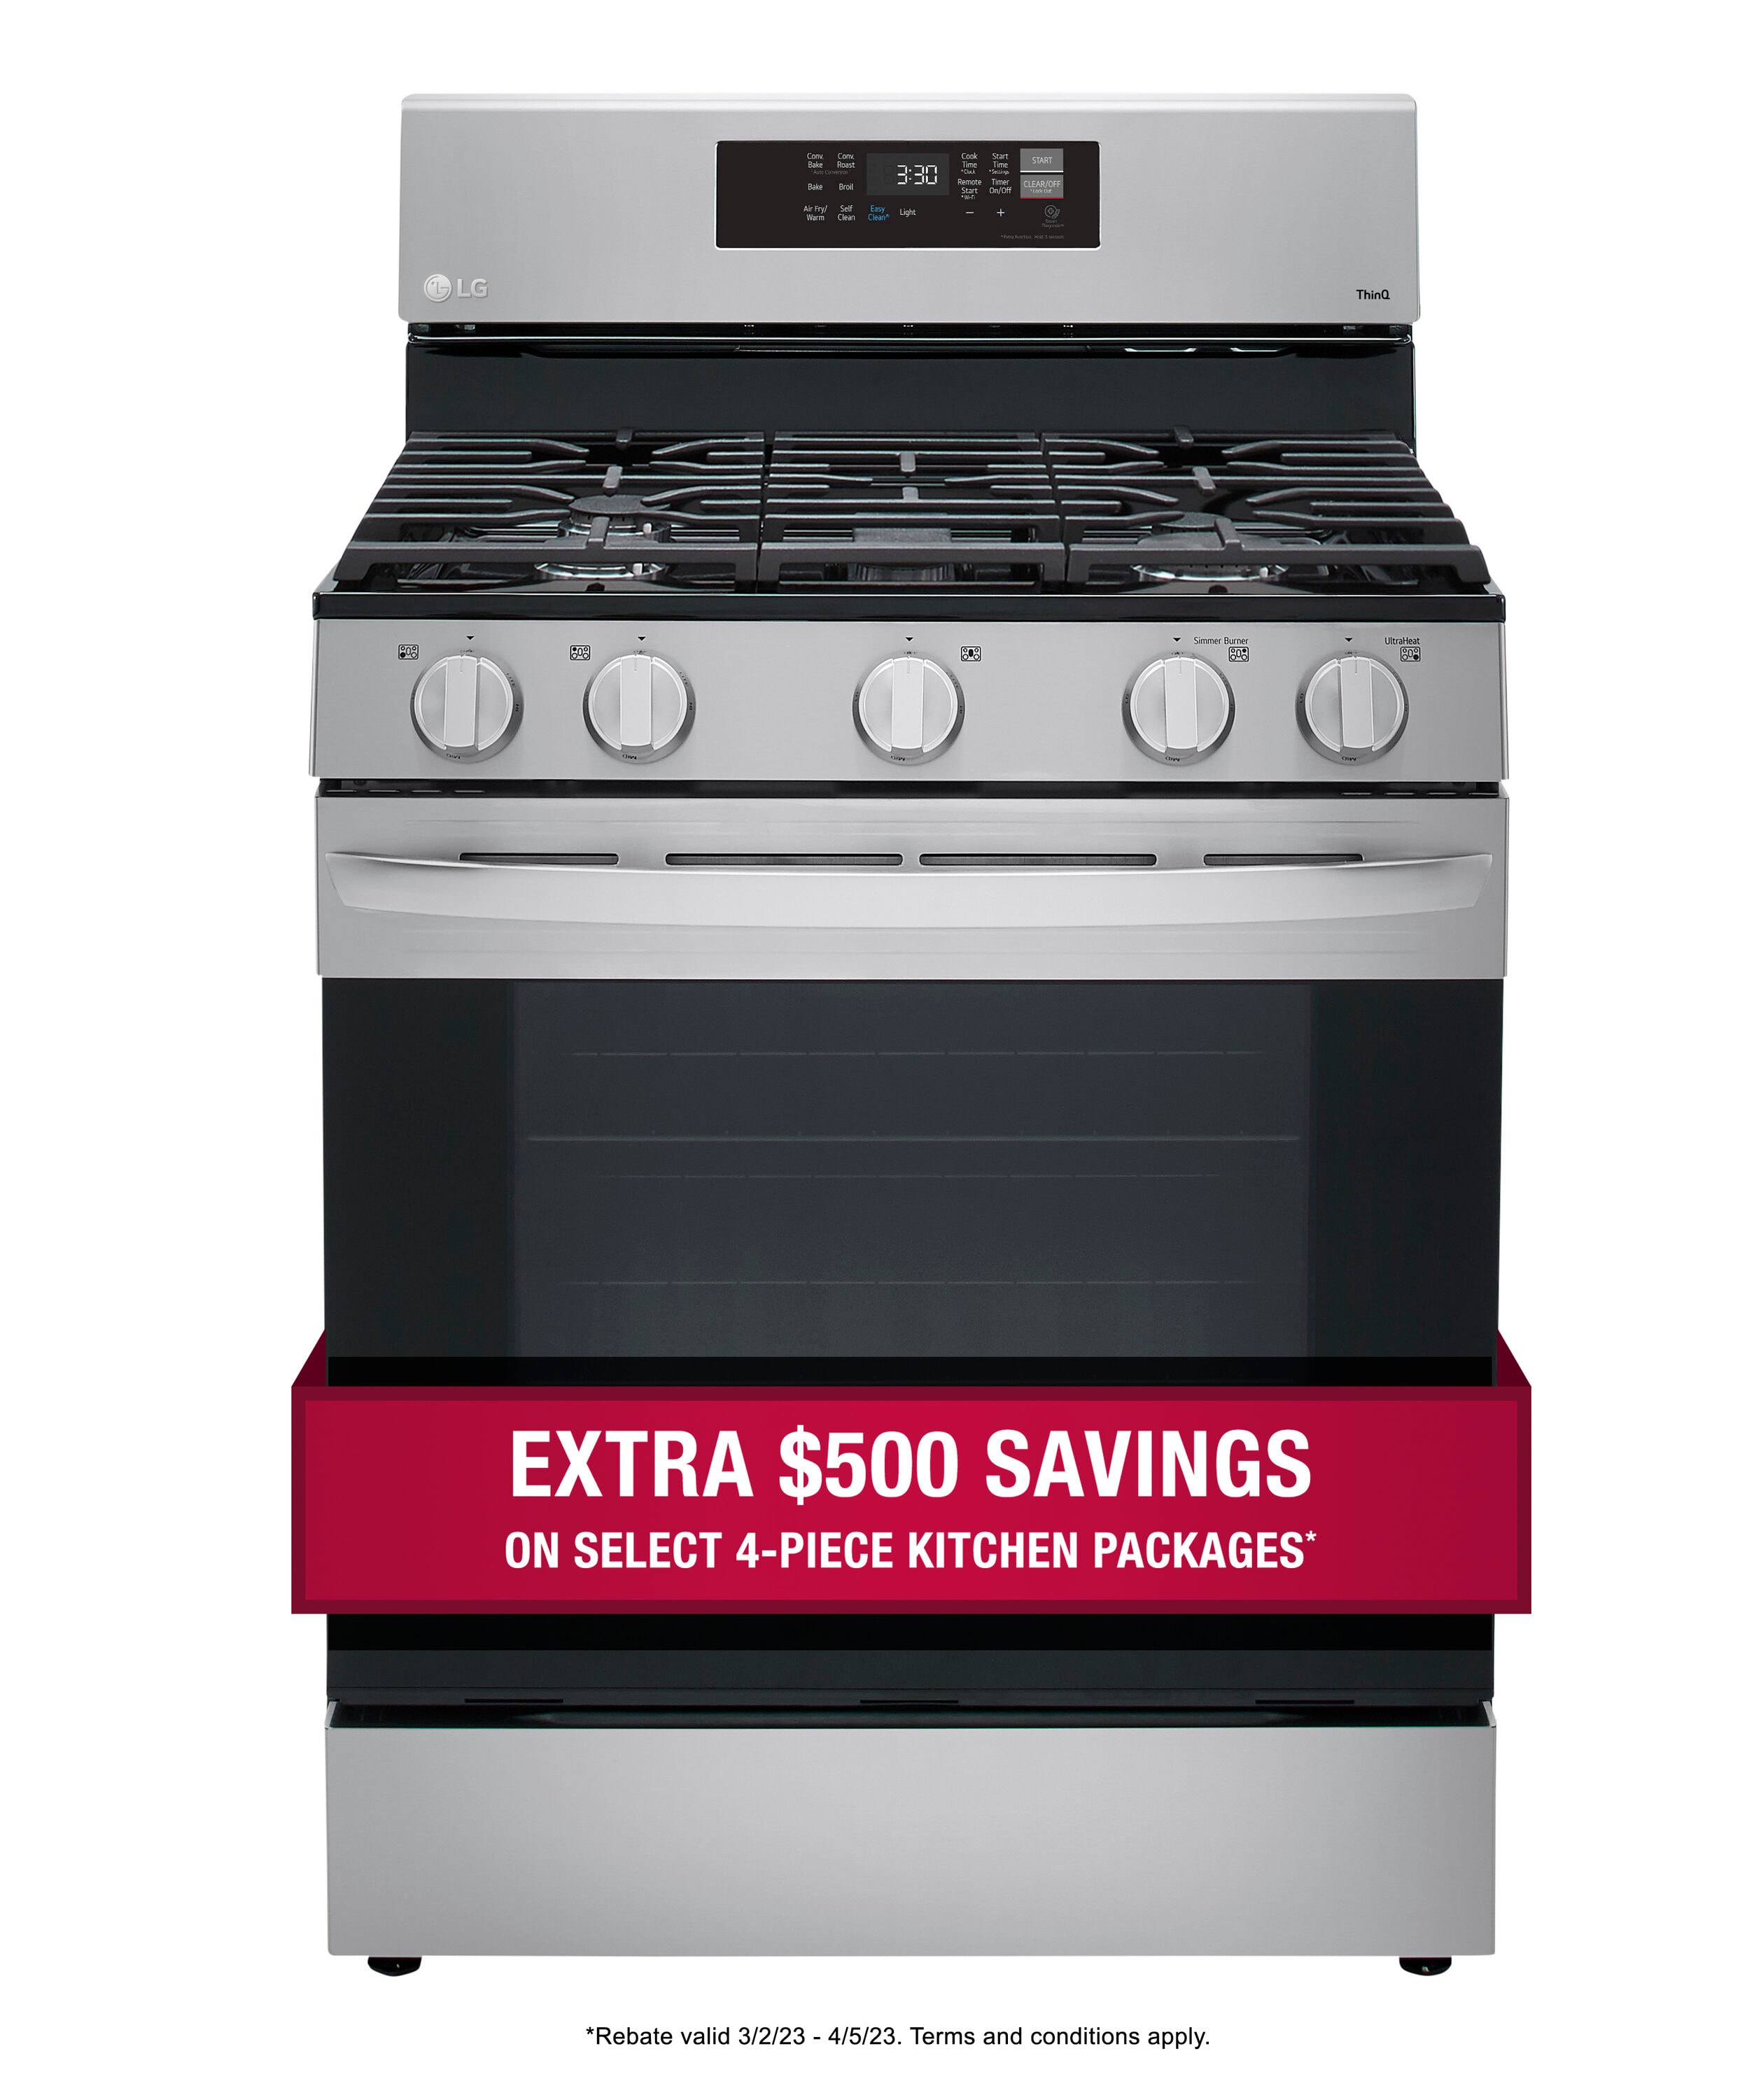 black-stainless-steel-36-in-gas-ranges-at-lowes